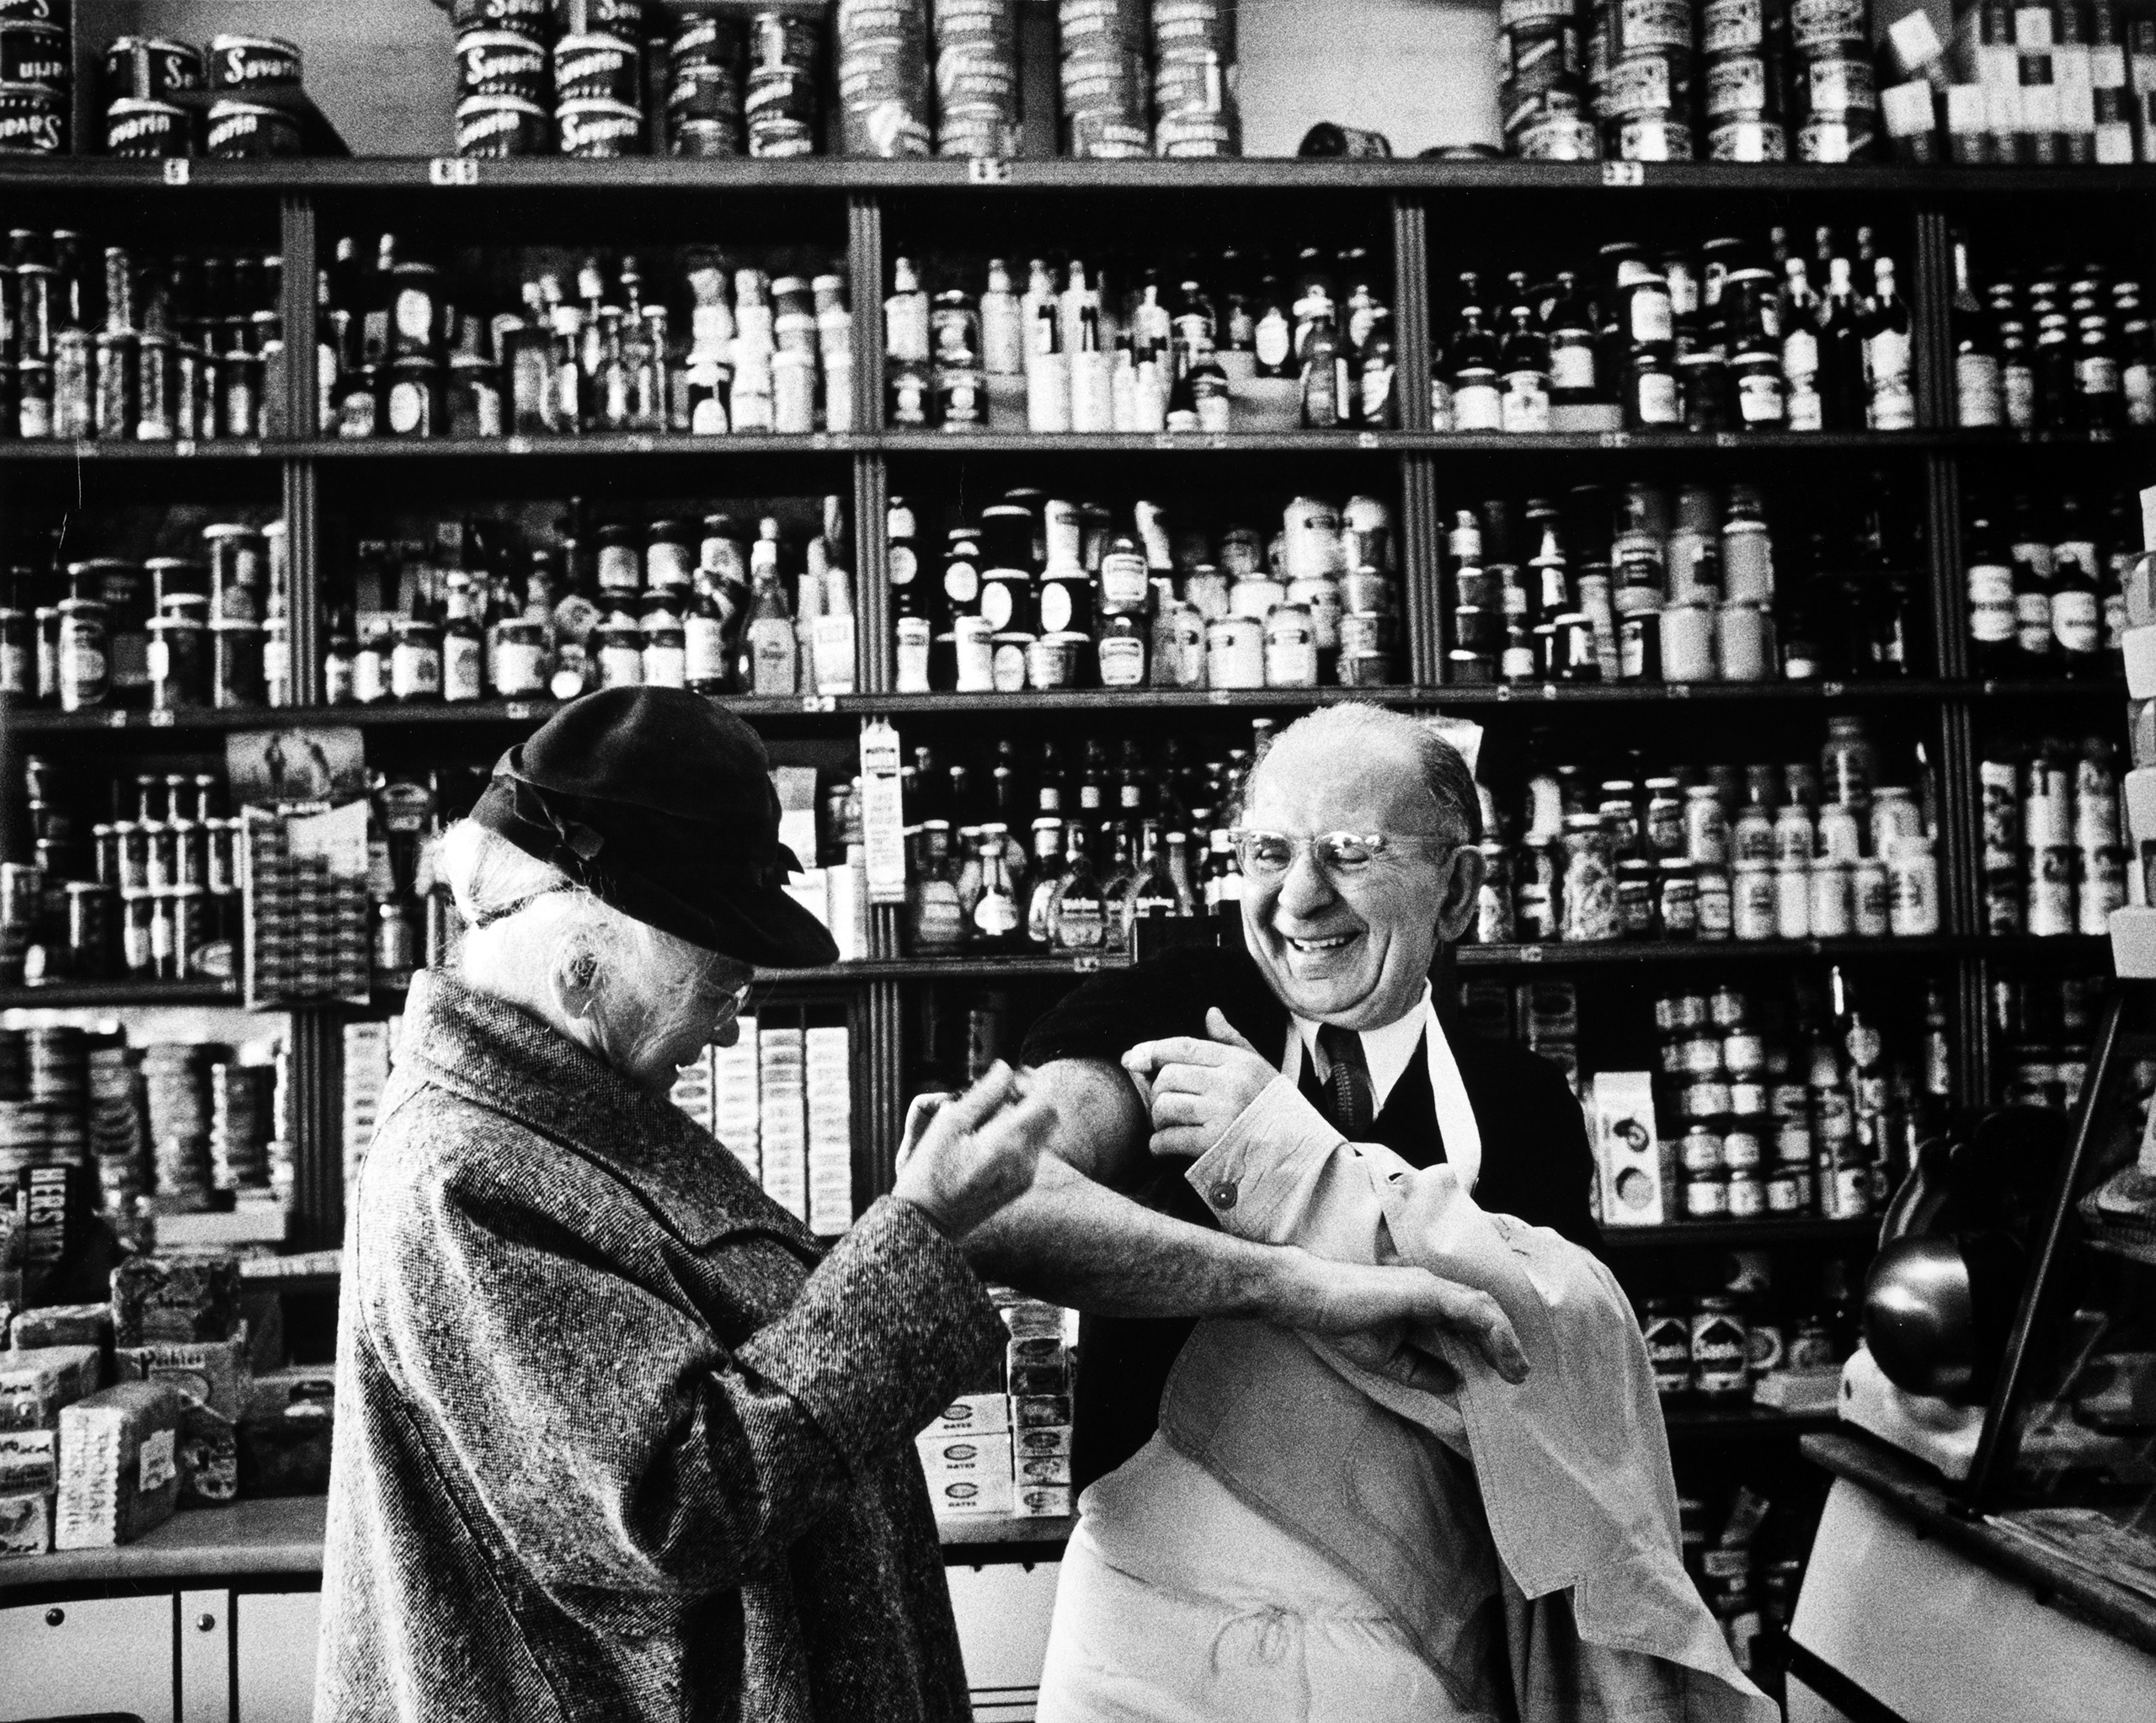 Dr. Connie M. Guion, the first female doctor in the United States to be named Professor of Clinical Medicine at Cornell University's Weill Medical College visits her neighborhood grocer to give him a vitamin shot, 1958. Published in  The Amazing Doctor Guion,  LOOK 25: 19 (Sept. 12, 1961)